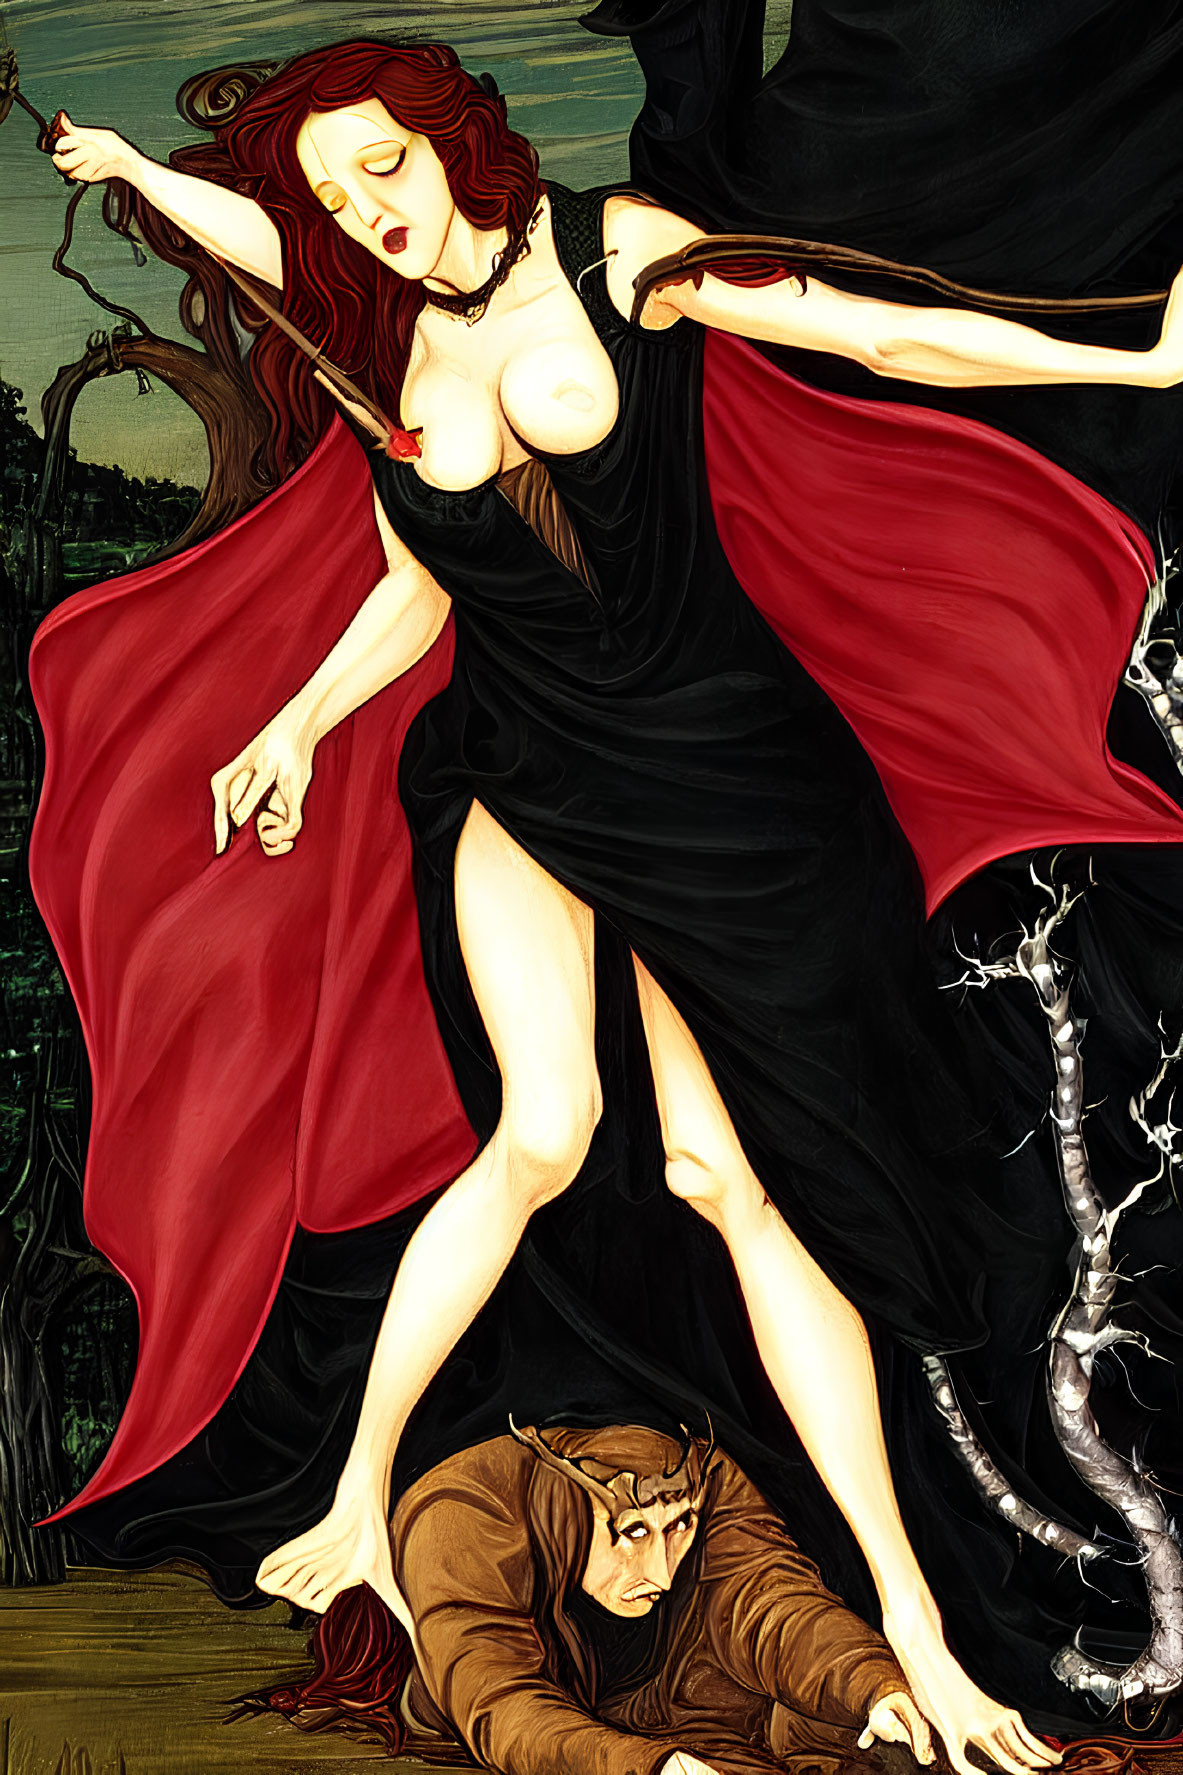 Illustration of woman in red cloak standing over crouched male figure